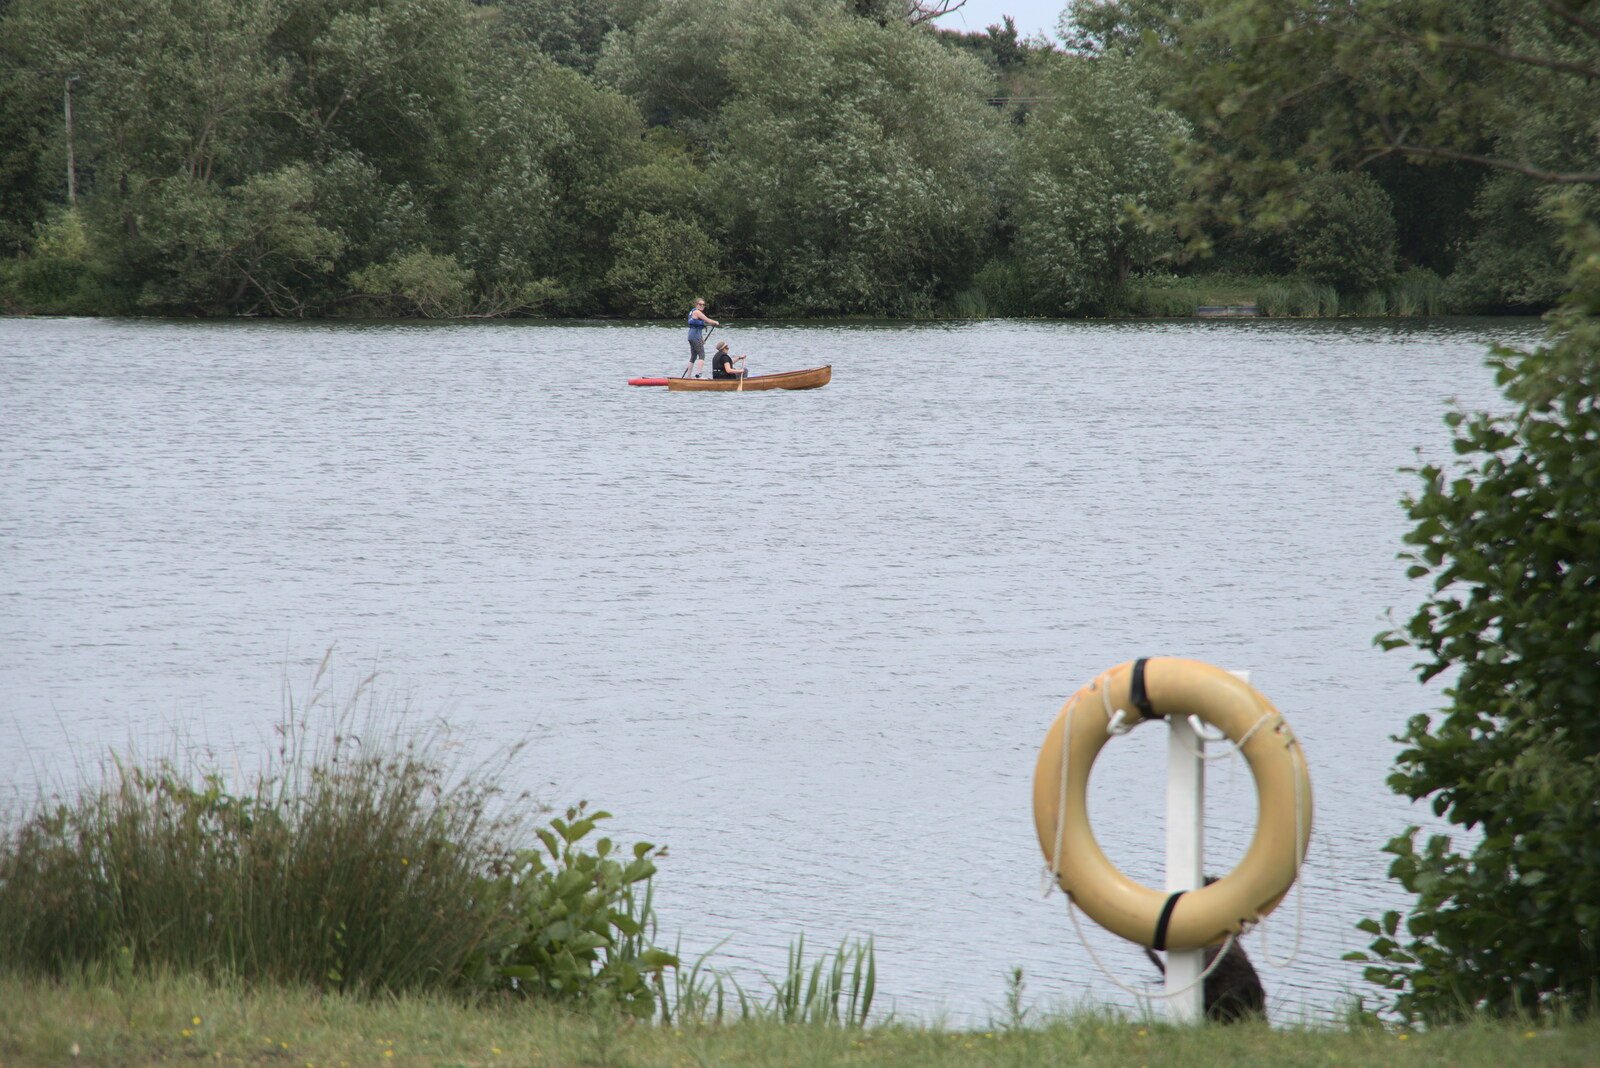 Allyson and Isobel are out for a paddle from Camping at the Lake, Weybread, Harleston - 25th June 2022